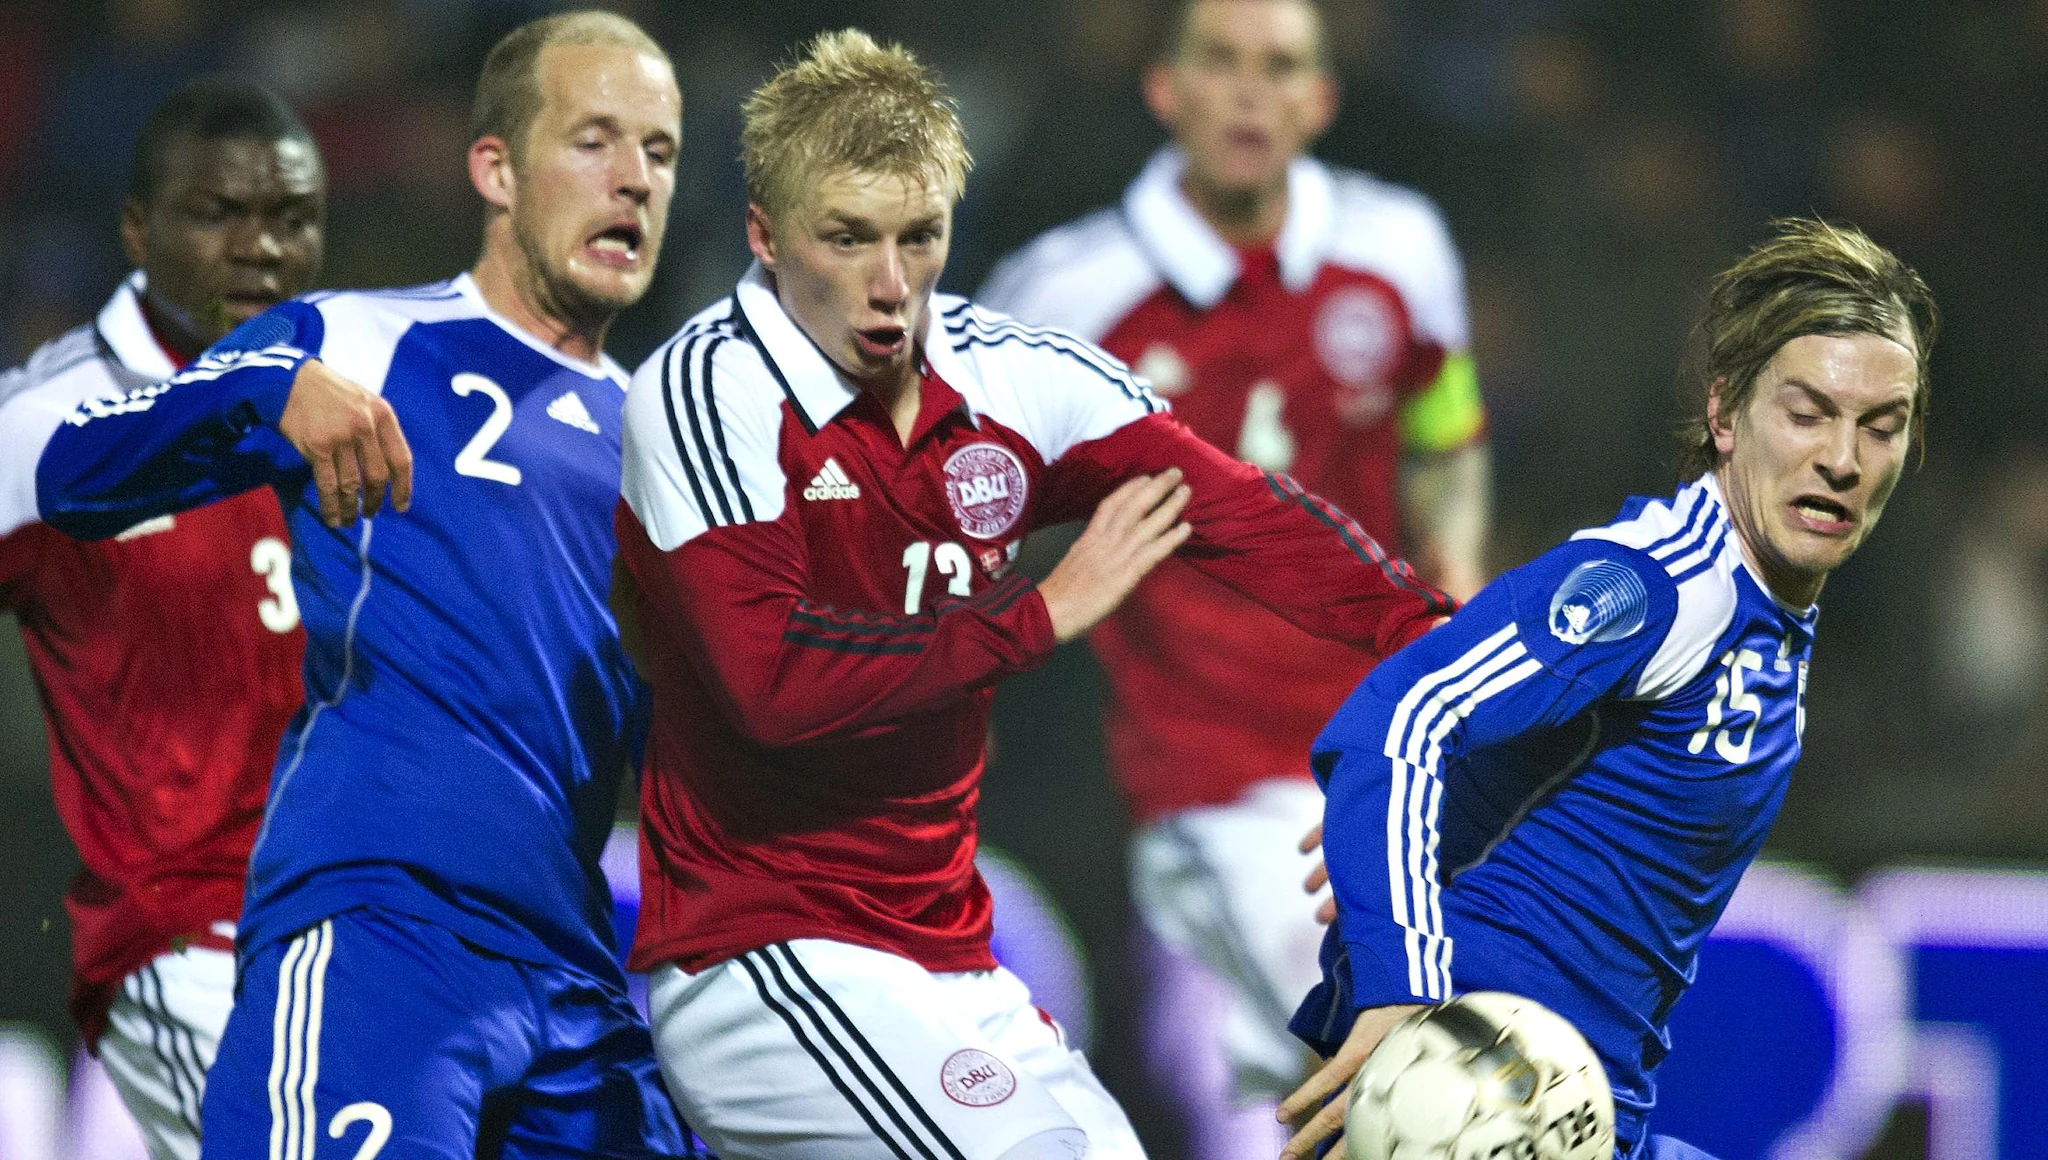 Denmark vs. Finland Preview & Betting Lines